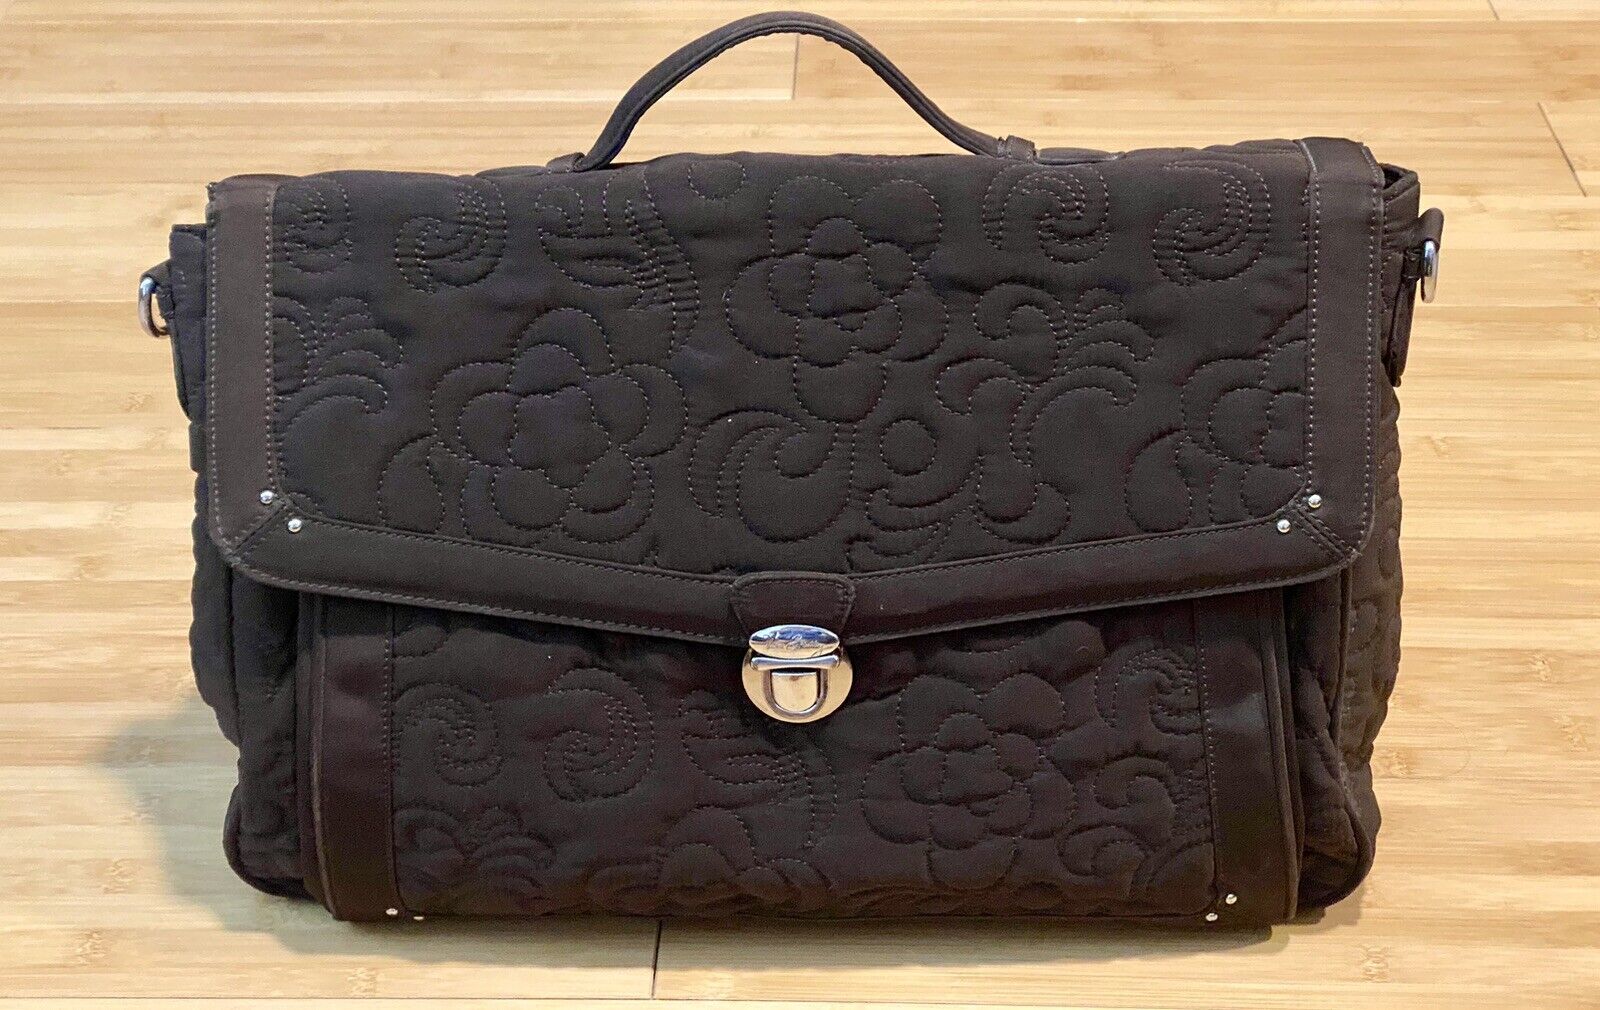 Vera Bradley Quilted Laptop Bag Briefcase Brown Large 17”W x 11”H x 4.75”D